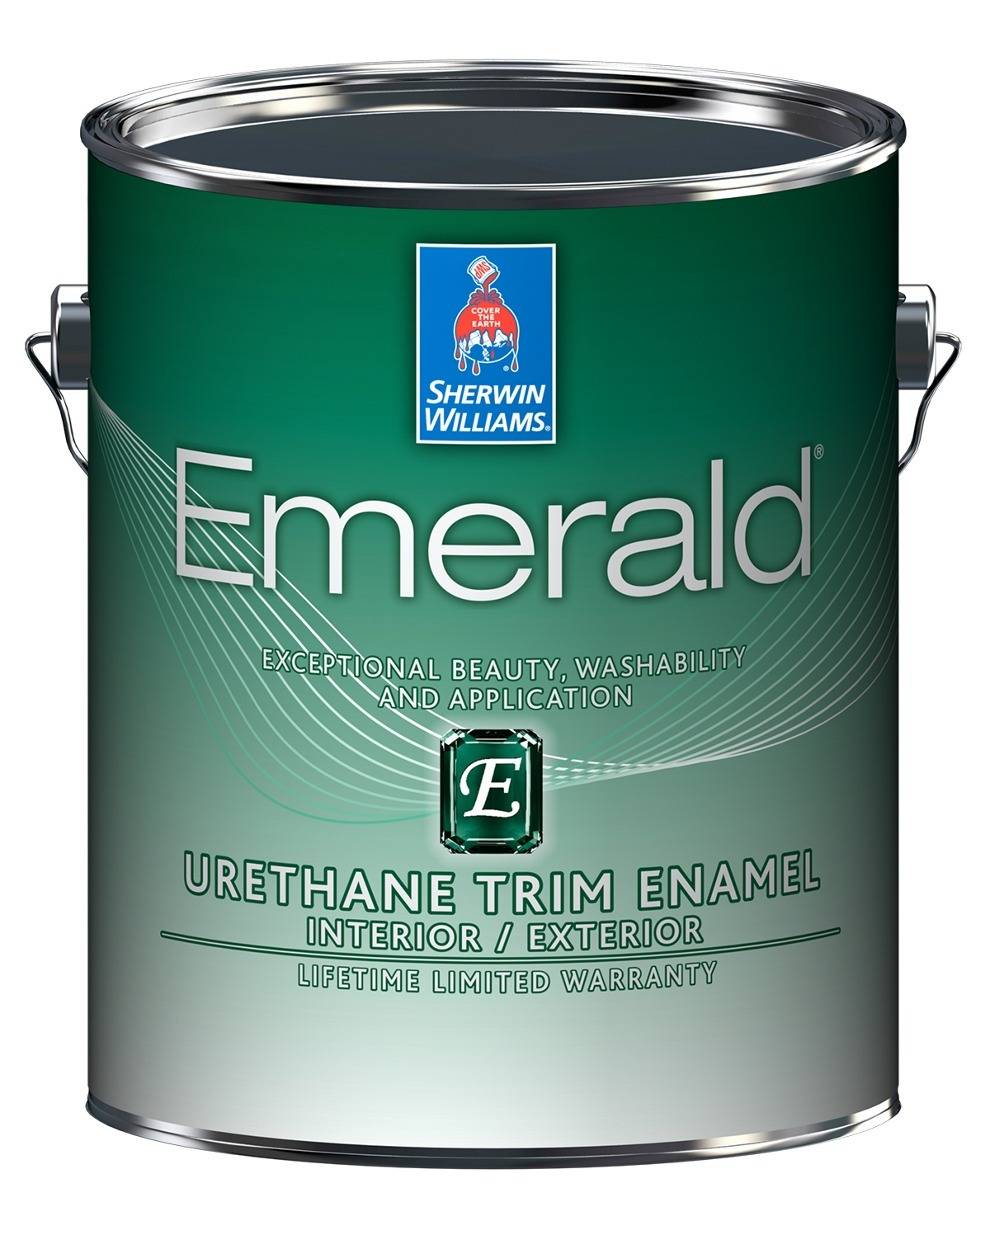 A gallon of Emerald paint.